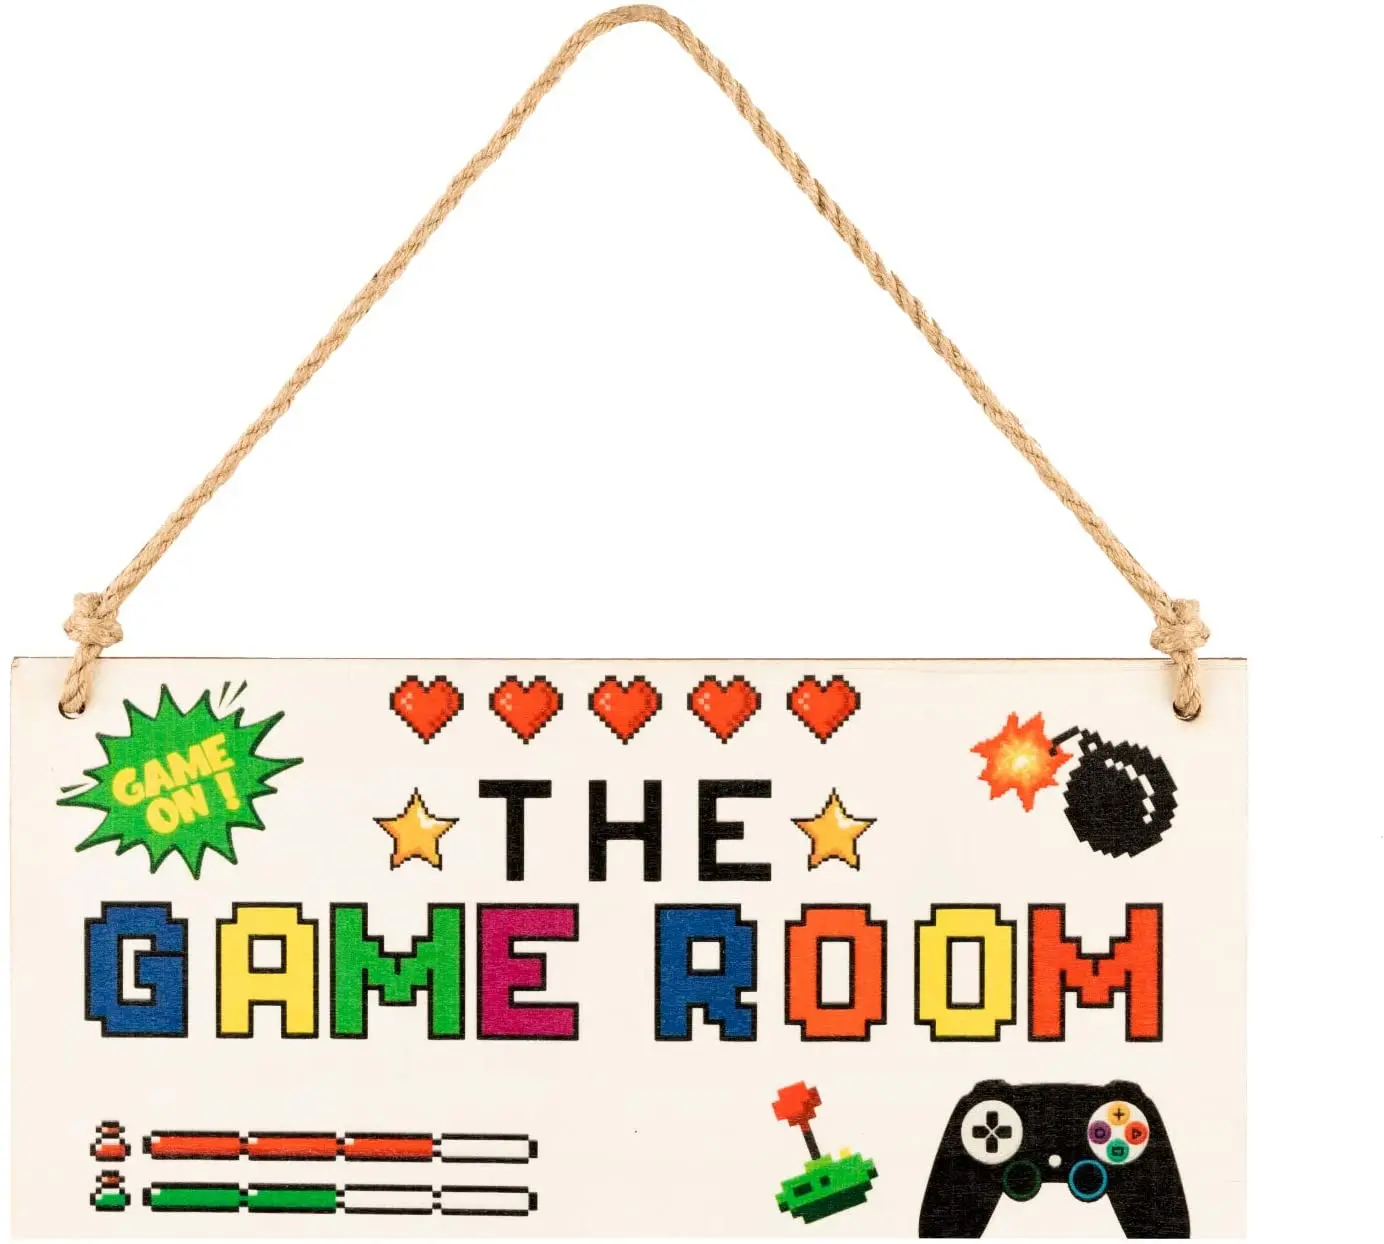 

Fun Game Room Sign Gamer Room Decor for Teen Boys Bedroom Playroom Gaming Area home decor